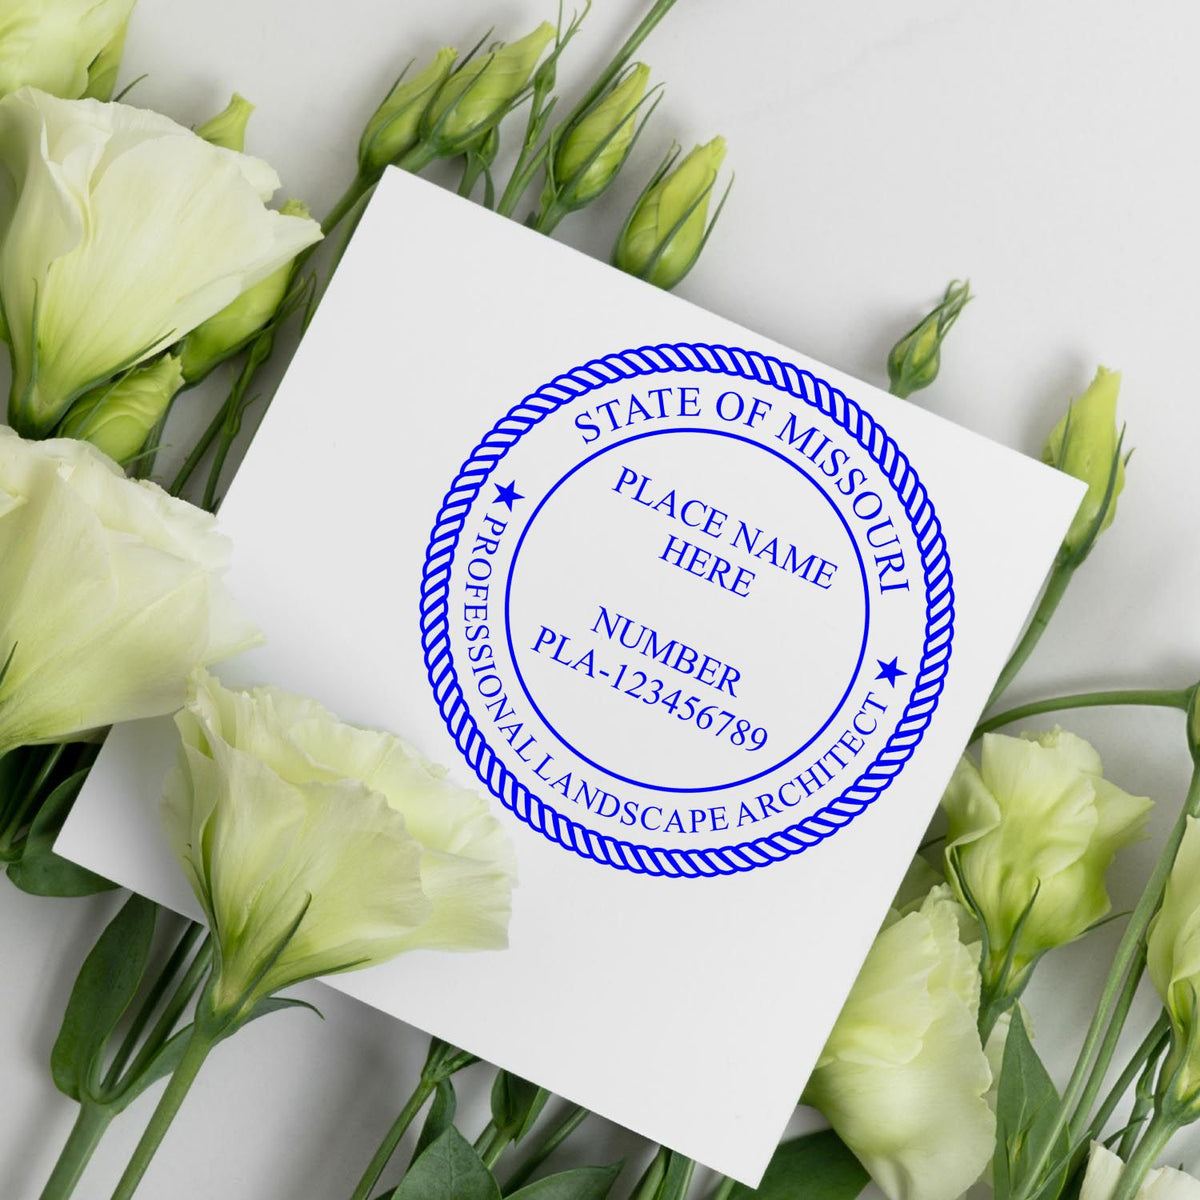 The Digital Missouri Landscape Architect Stamp stamp impression comes to life with a crisp, detailed photo on paper - showcasing true professional quality.